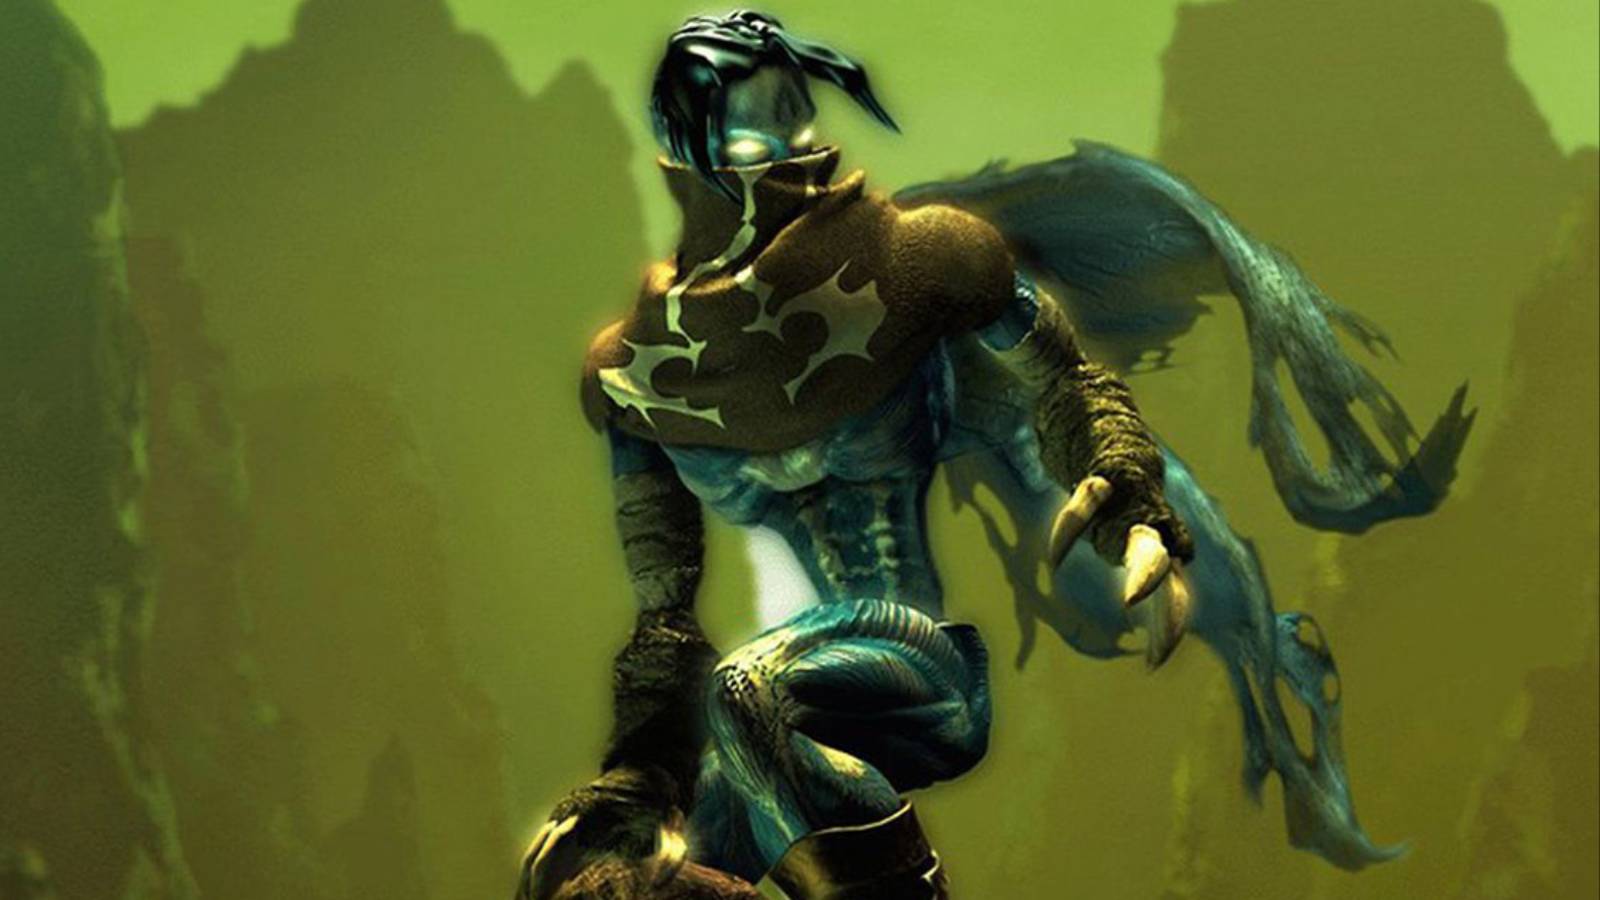  Cool statues at Comic-Con might've leaked upcoming Legacy of Kain: Soul Reaver remasters 